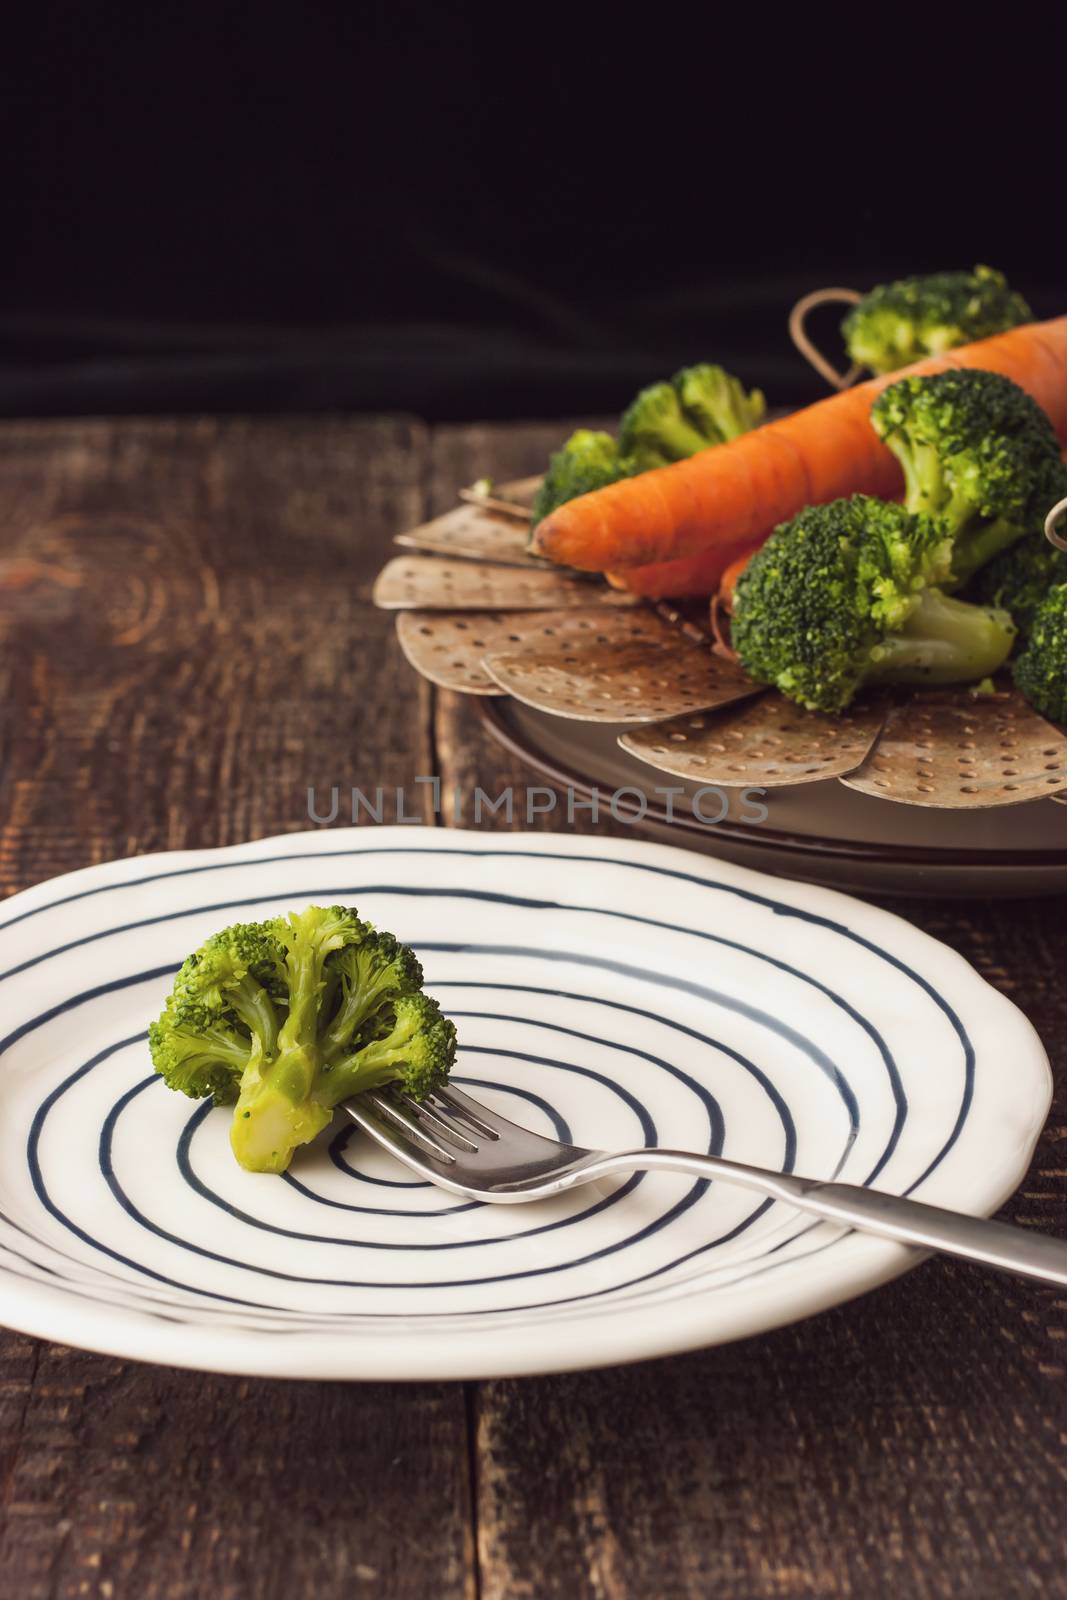 Steamed broccoli on a fork on the ceramic plate vertical